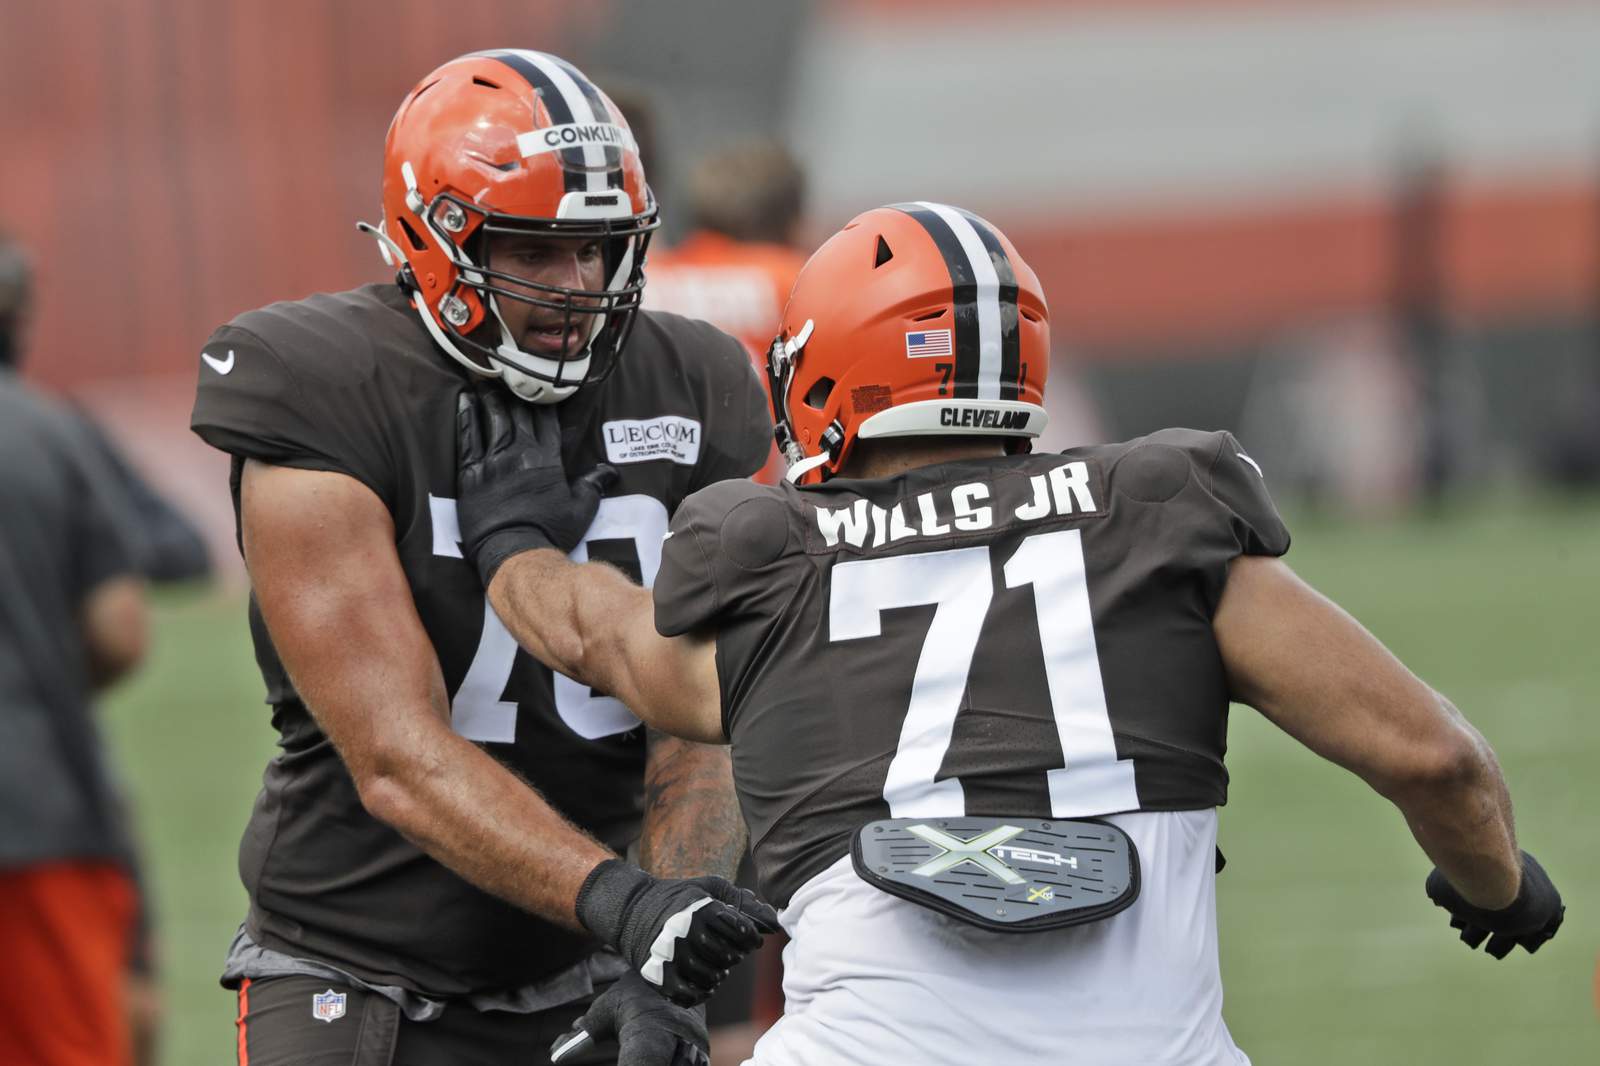 Browns tackle Conklin not starting against Bengals